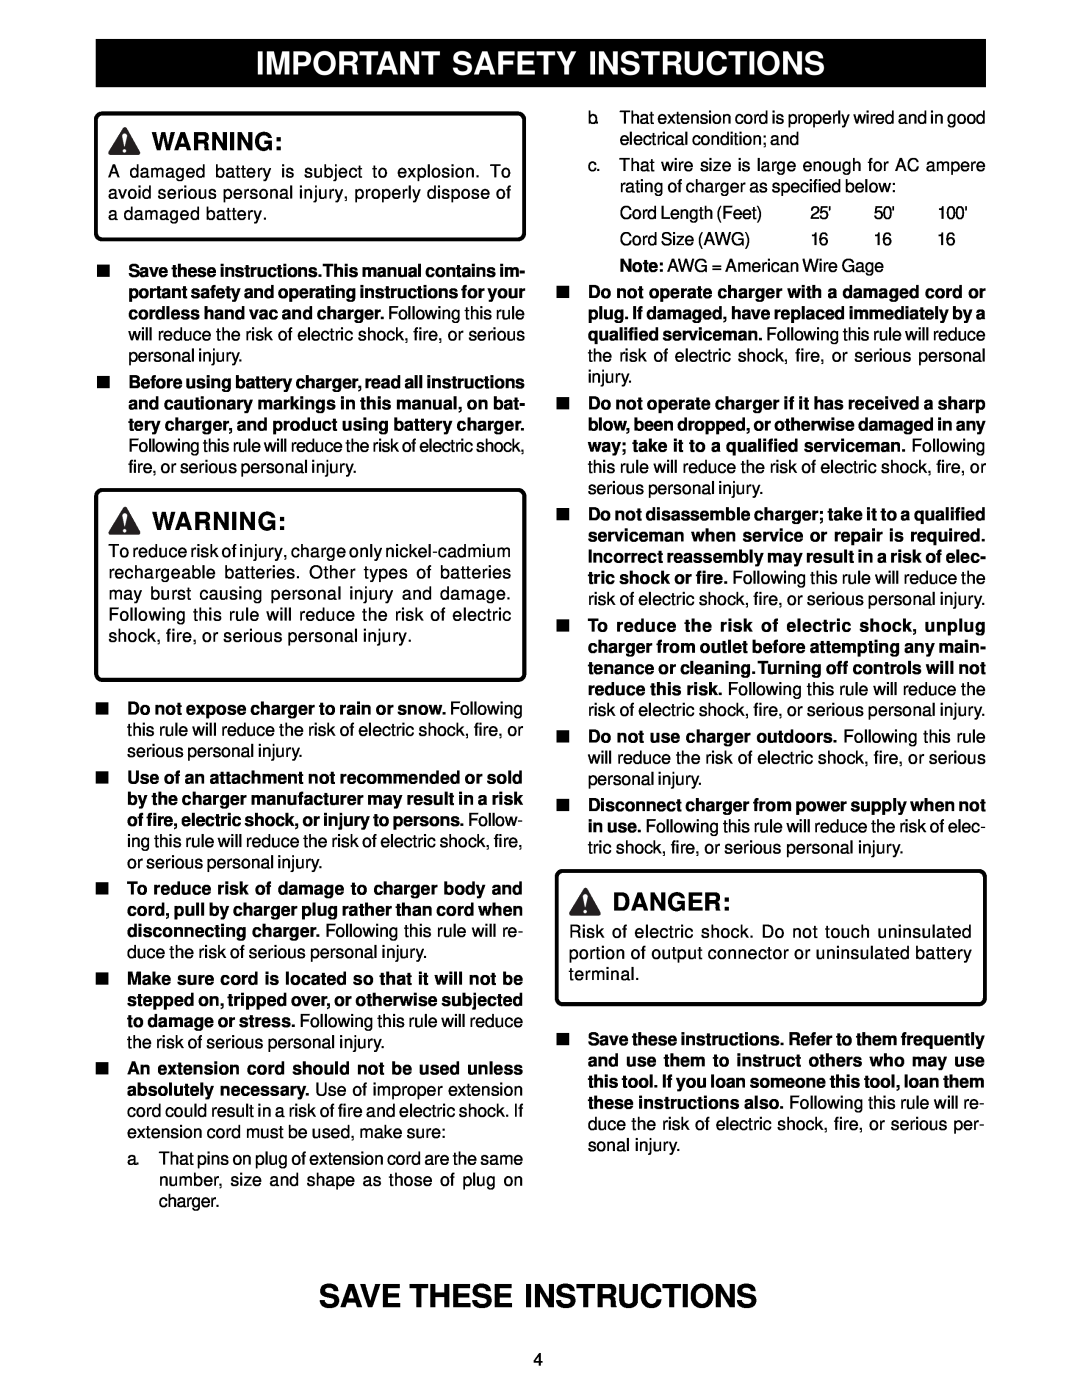 Ryobi VC722 manual Save These Instructions, Important Safety Instructions, Danger 